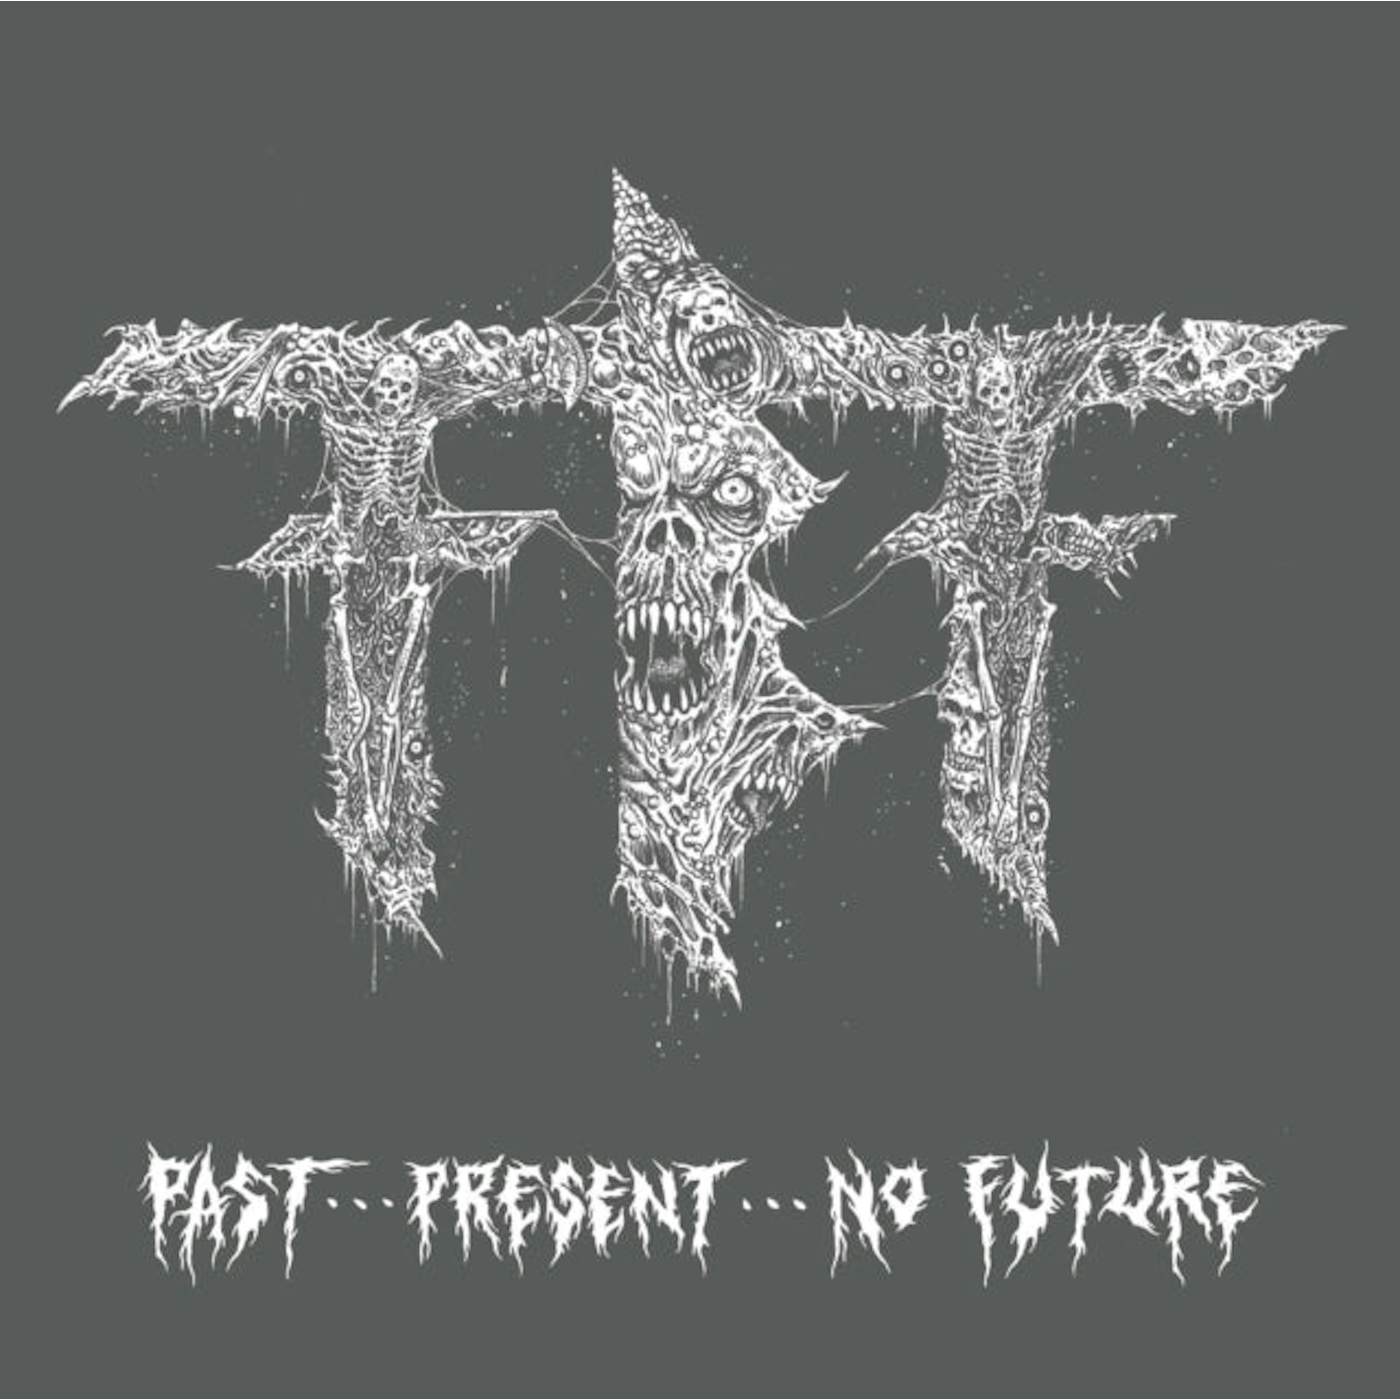 Fueled By Fire CD - Past...Present...No Future